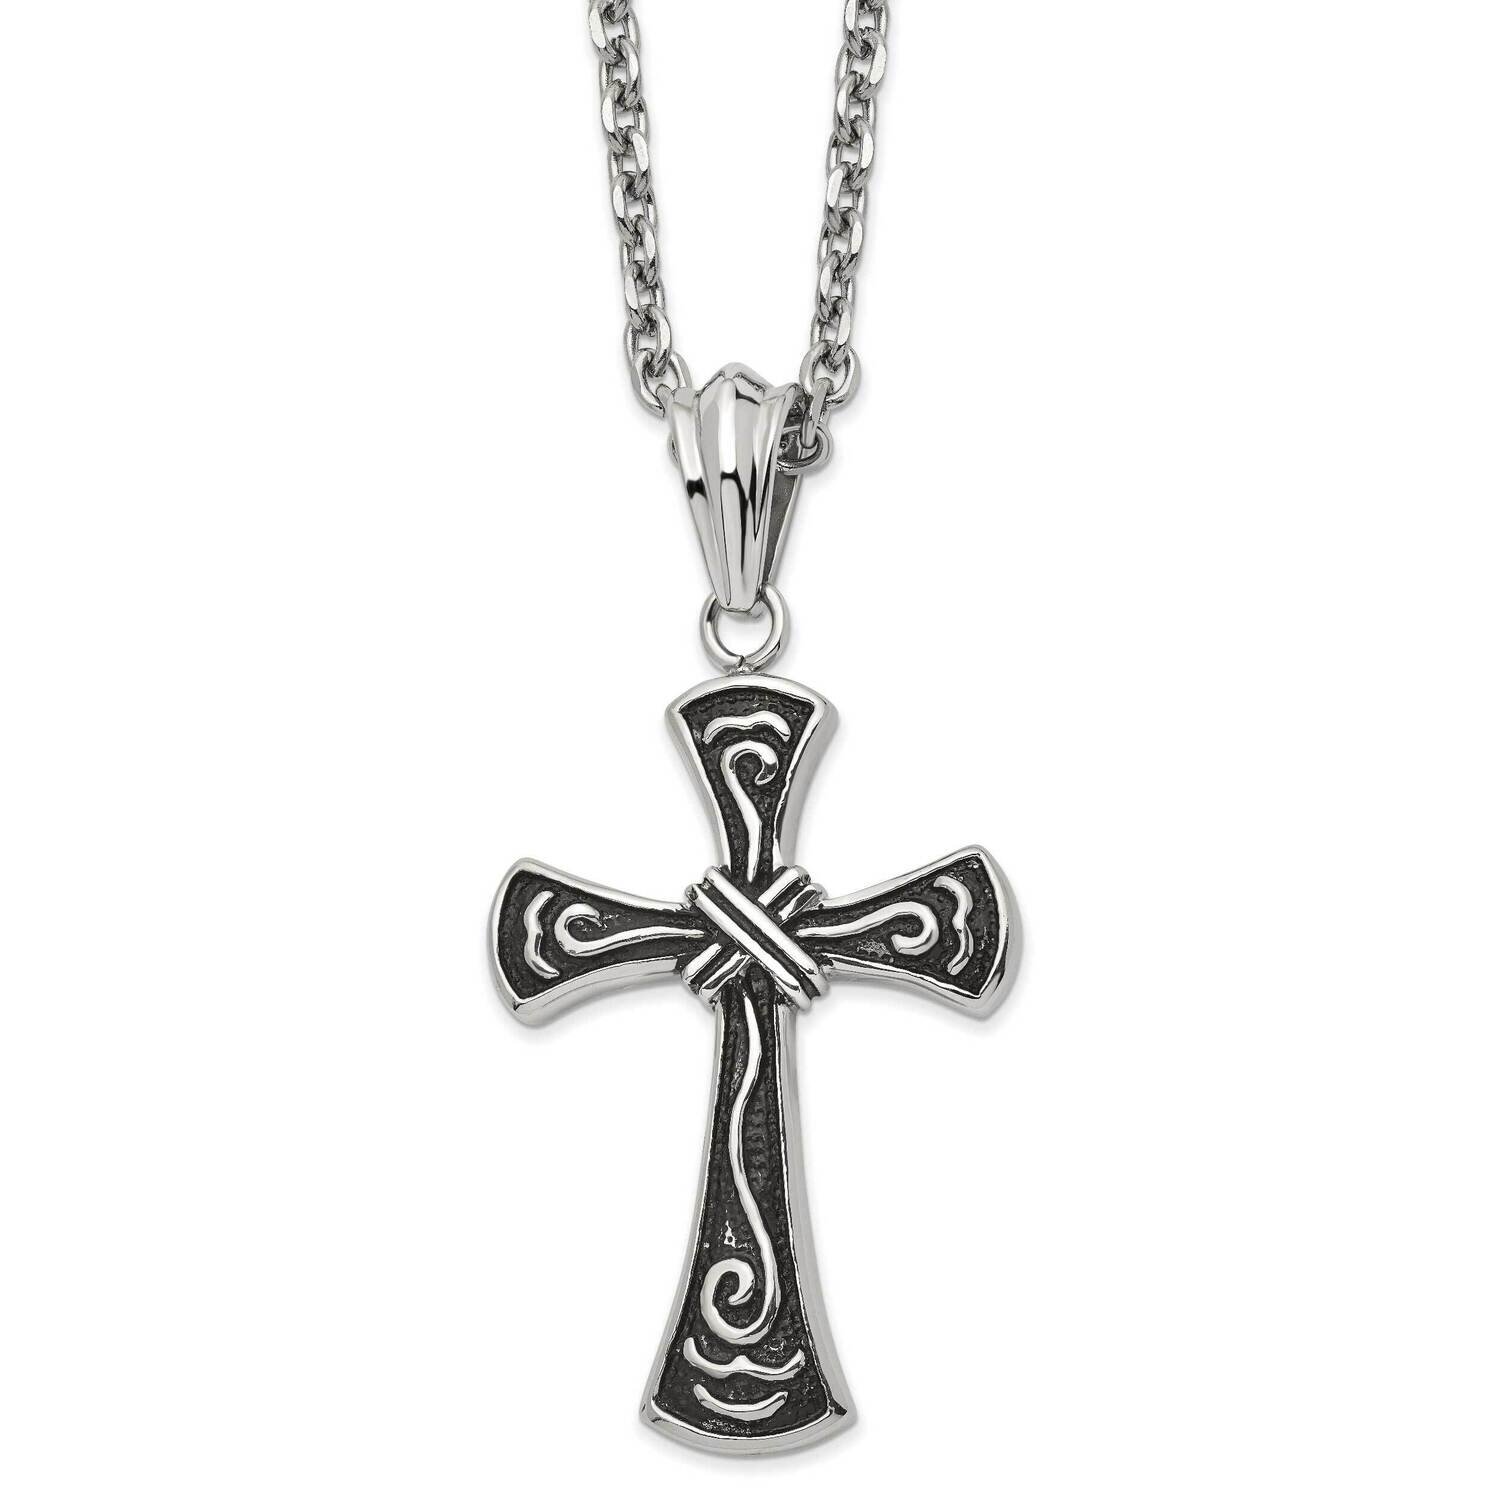 Antiqued and Polished Cross 24 Inch Necklace Stainless Steel SRN2857-24